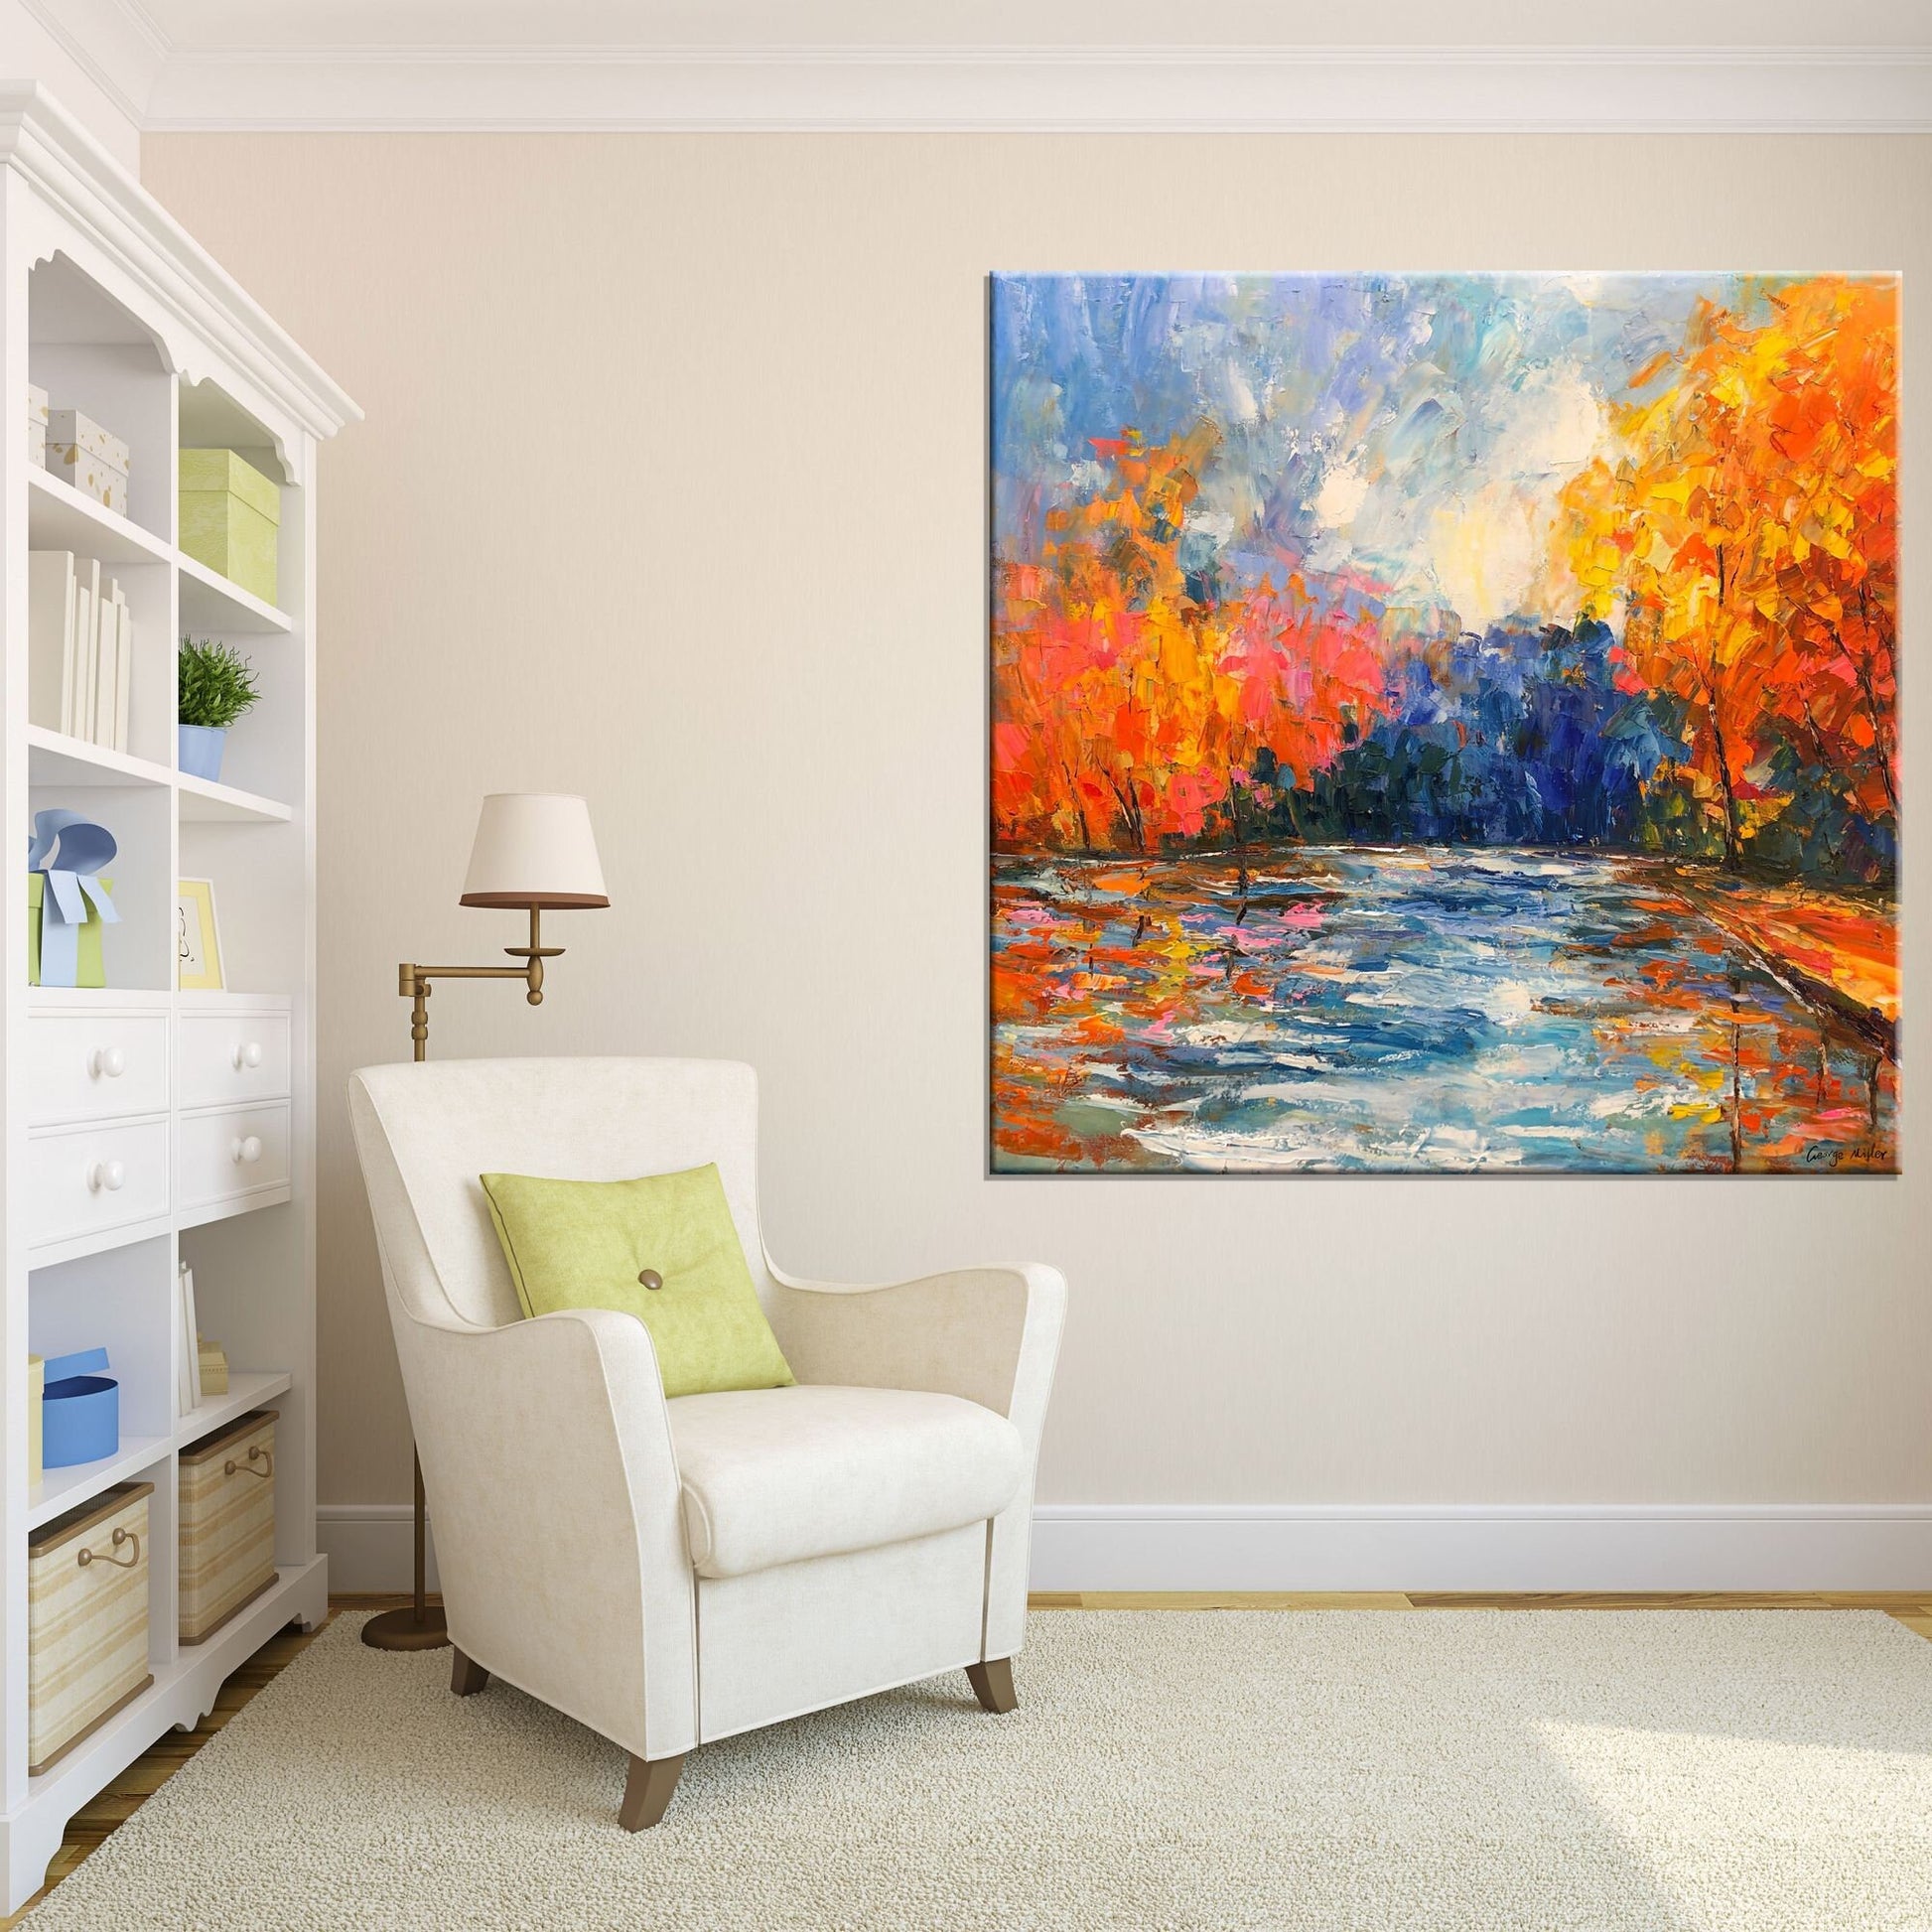 Landscape Oil Painting Autumn Trees By The Pond, Canvas Art, Oil On Canvas Painting, Abstract Landscape, Extra Large Wall Art, Contemporary